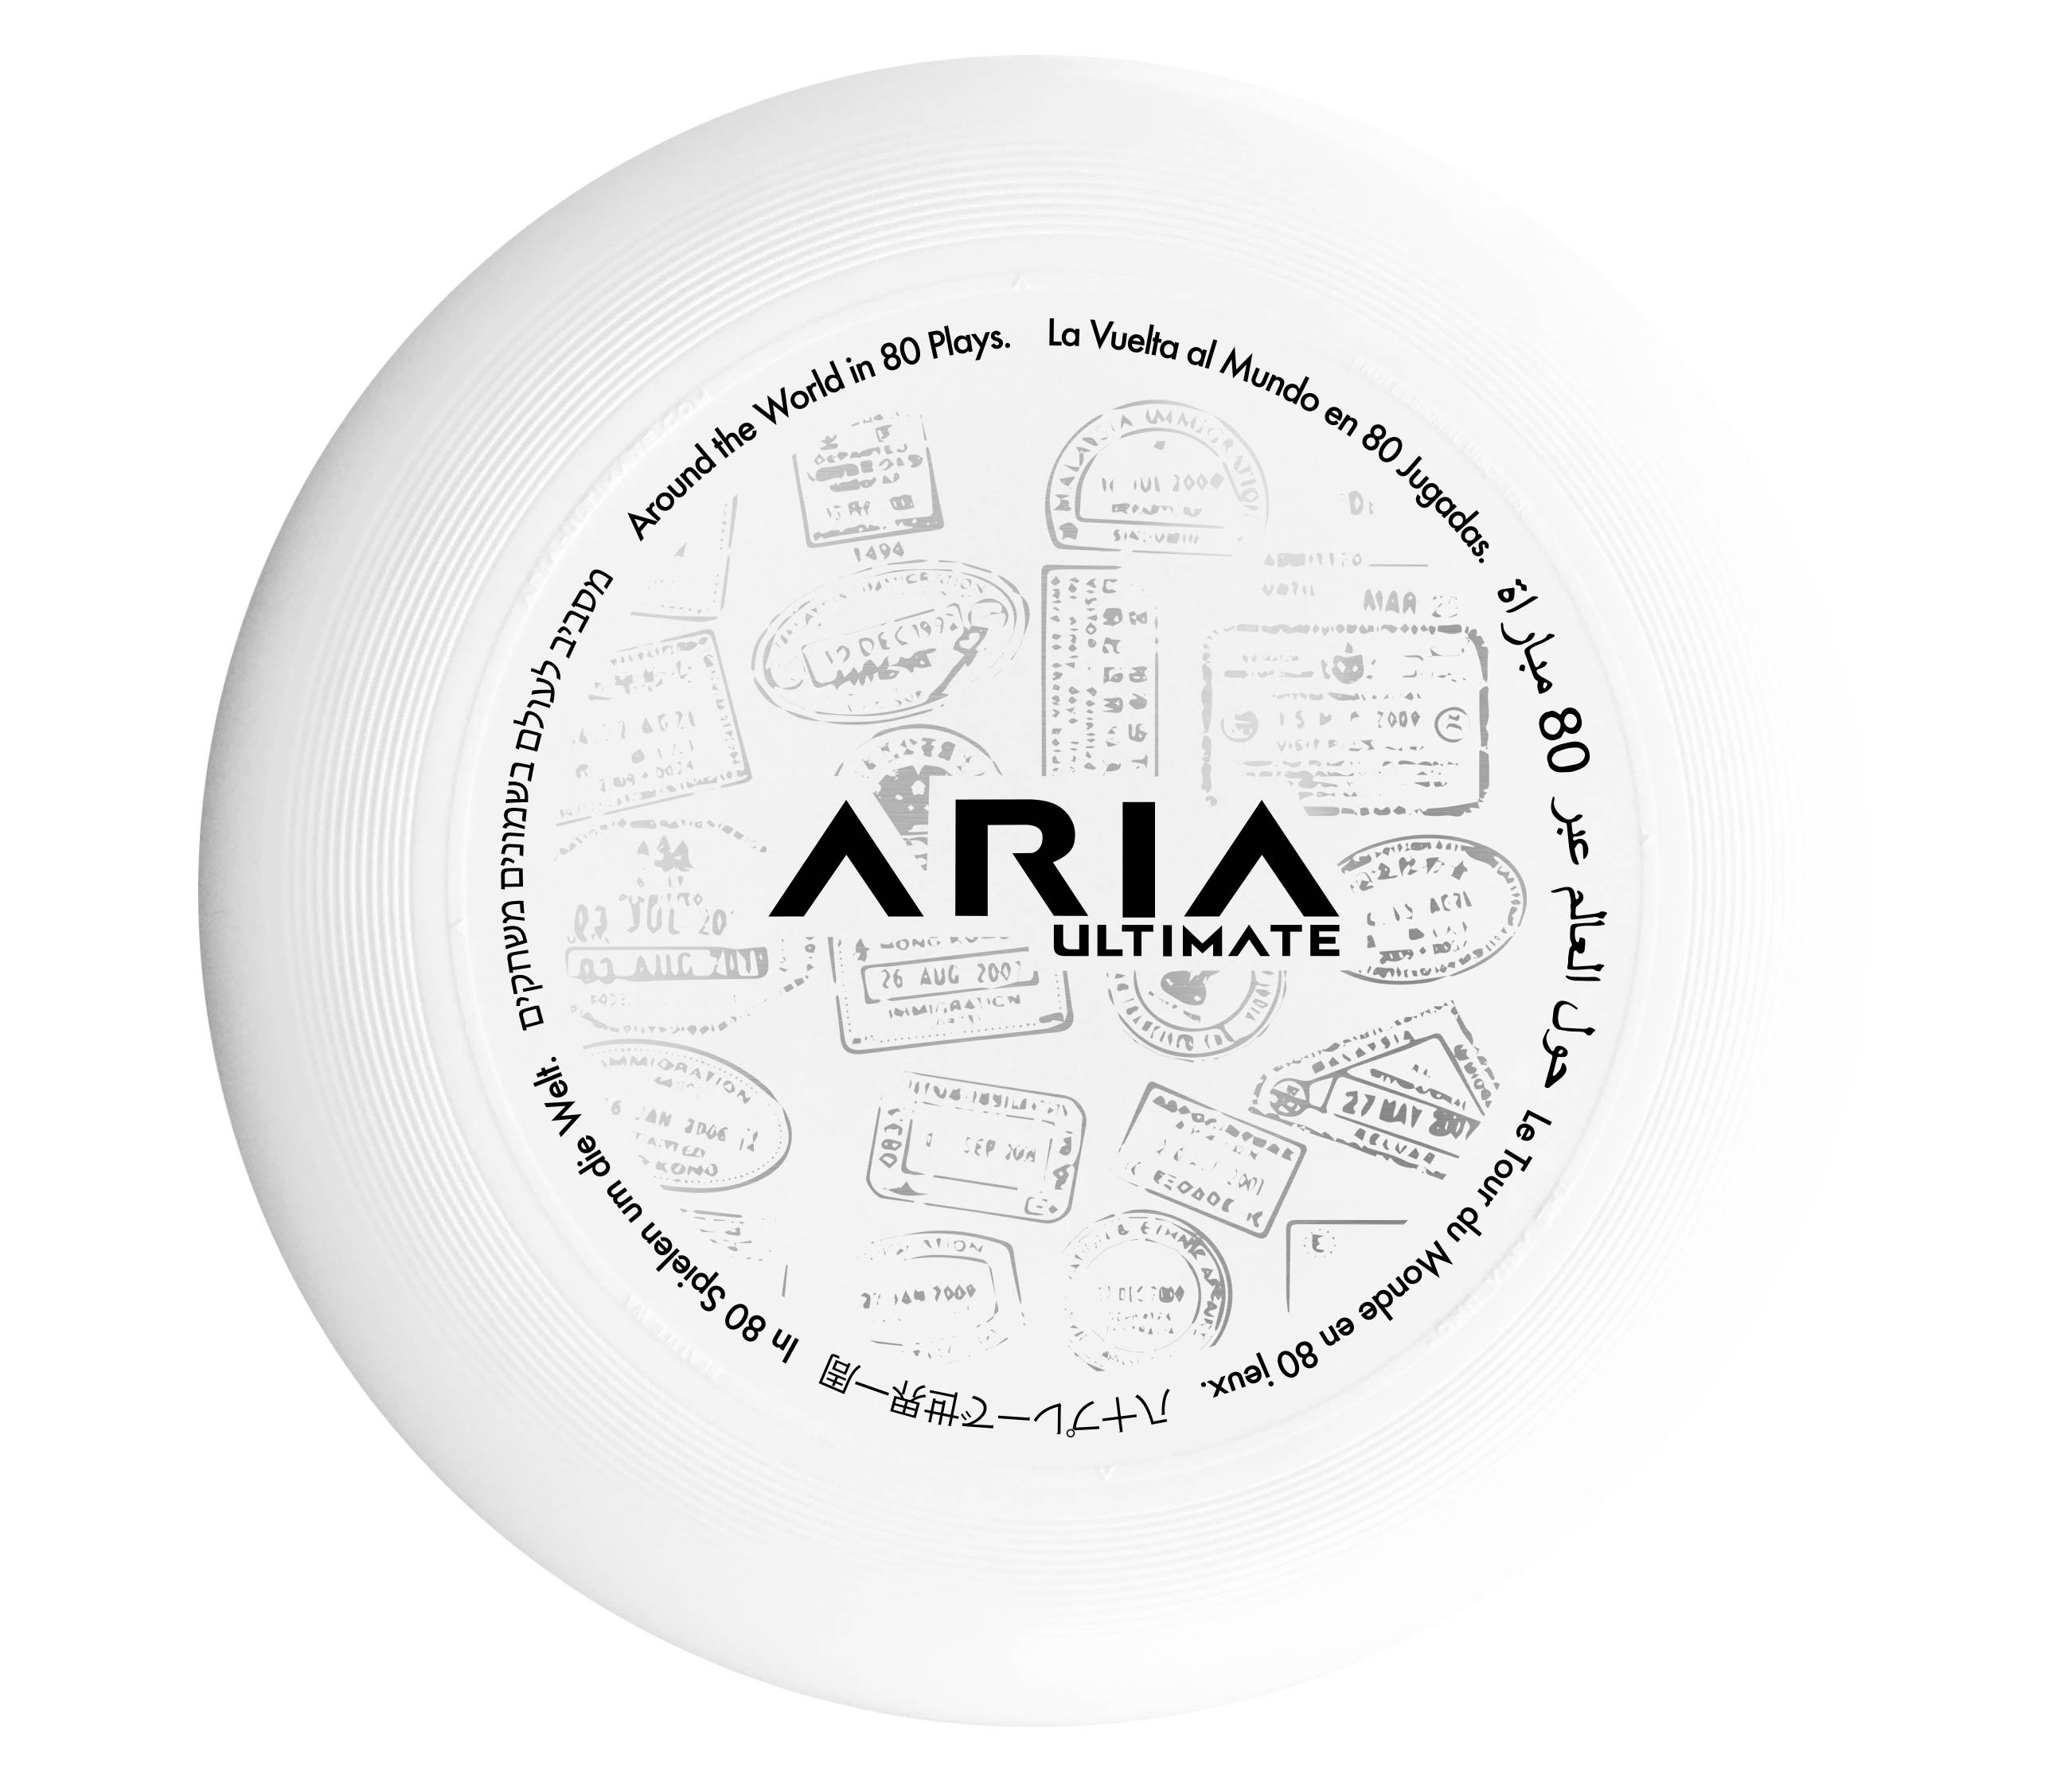 ARIA professional official ultimate flying disc for the sport commonly known as 'ultimate frisbee'  around the world in 80 plays aroundtheworldin80plays